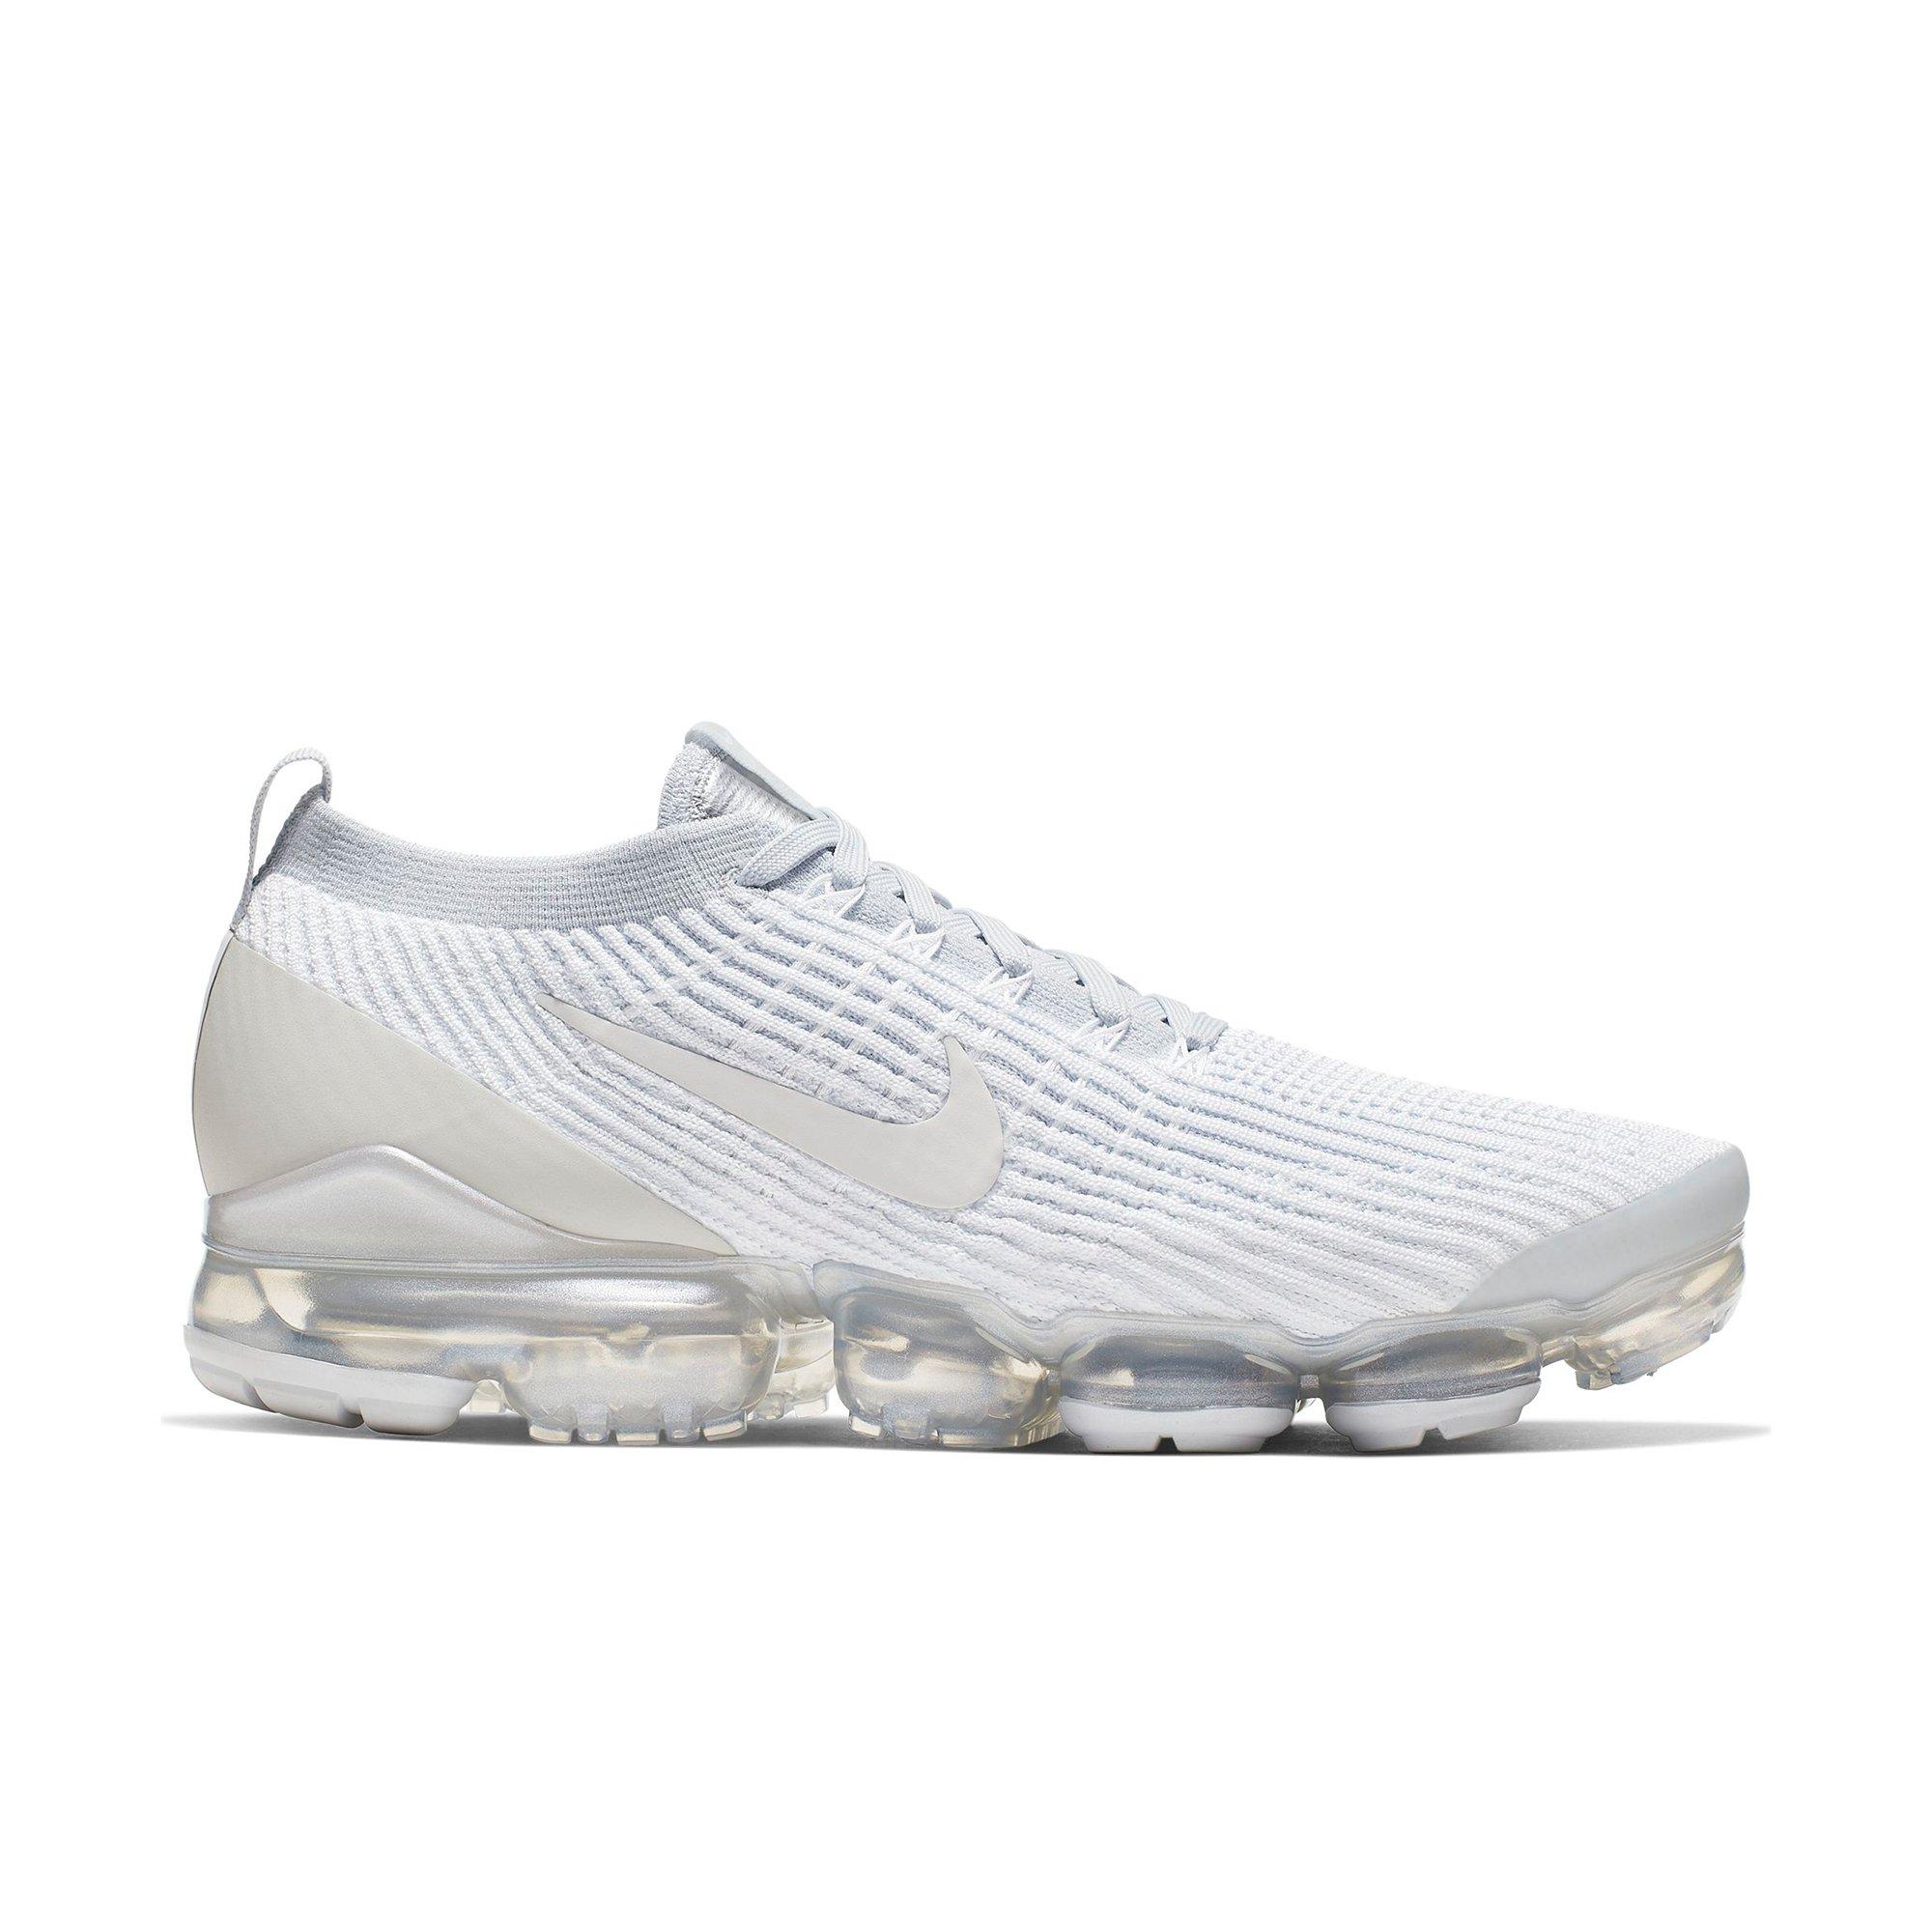 the cheapest vapormax